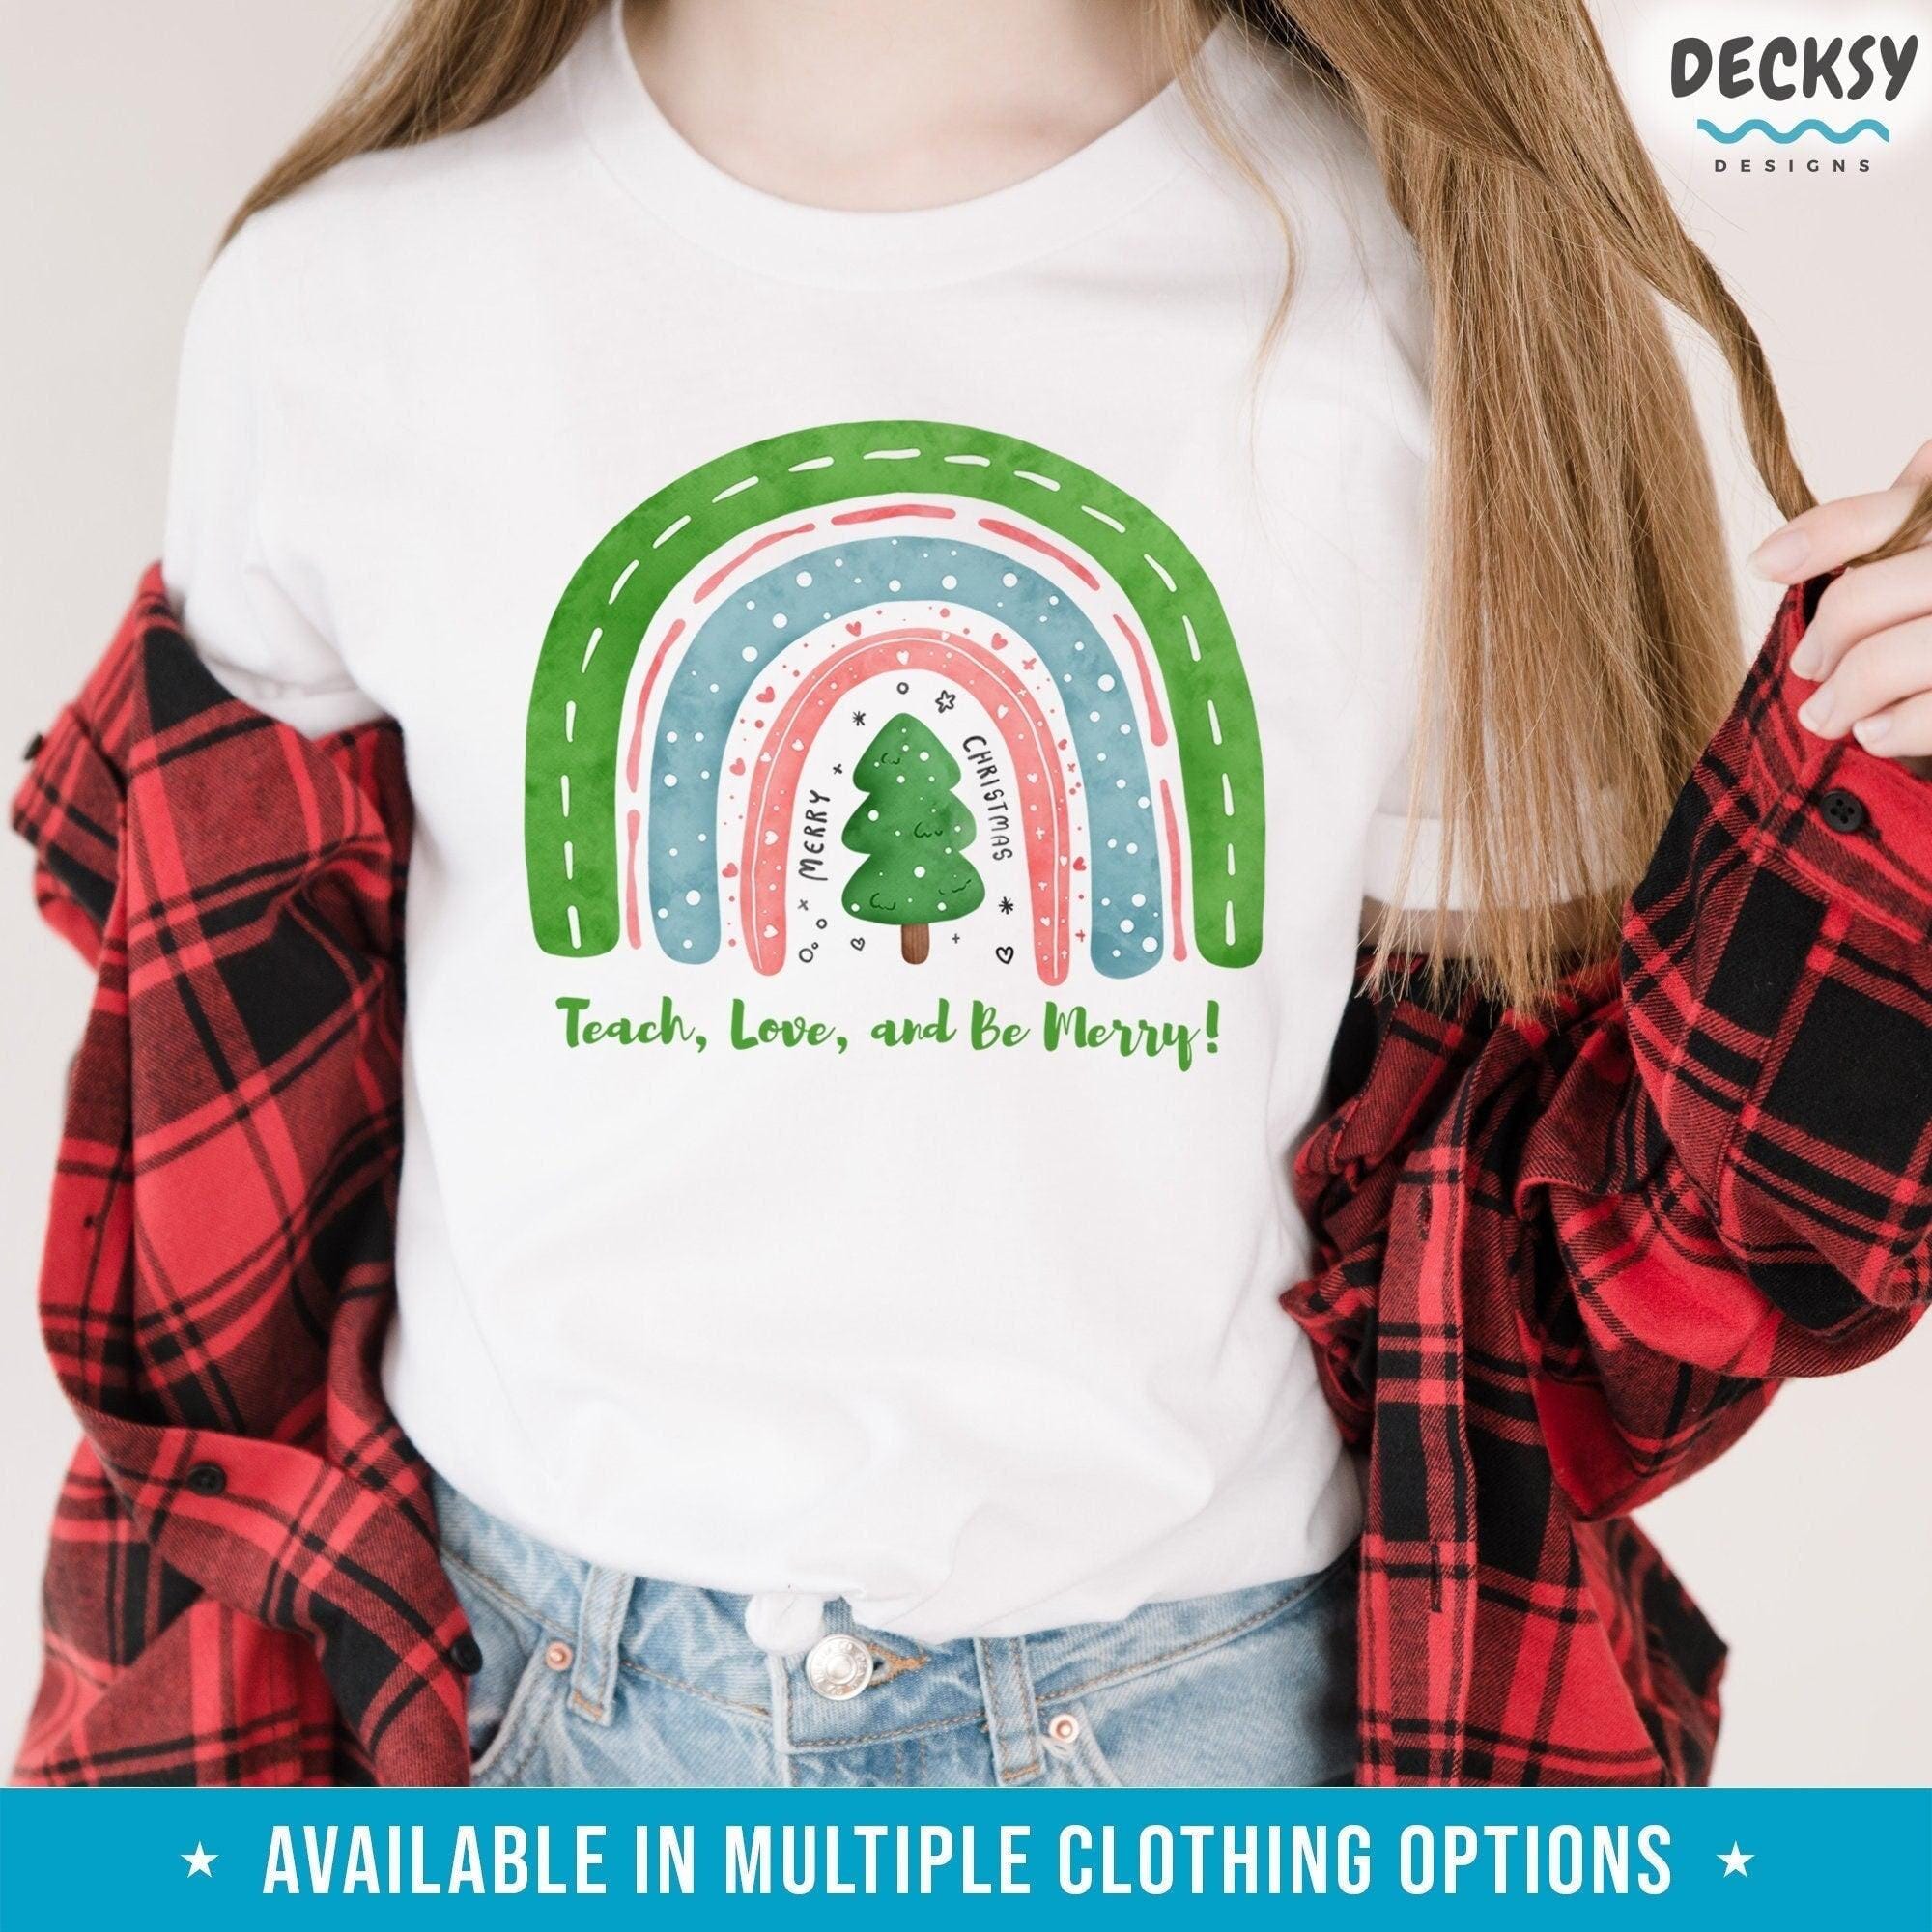 Teacher Christmas Shirt, Gift For Educator-Clothing:Gender-Neutral Adult Clothing:Tops & Tees:T-shirts:Graphic Tees-DecksyDesigns